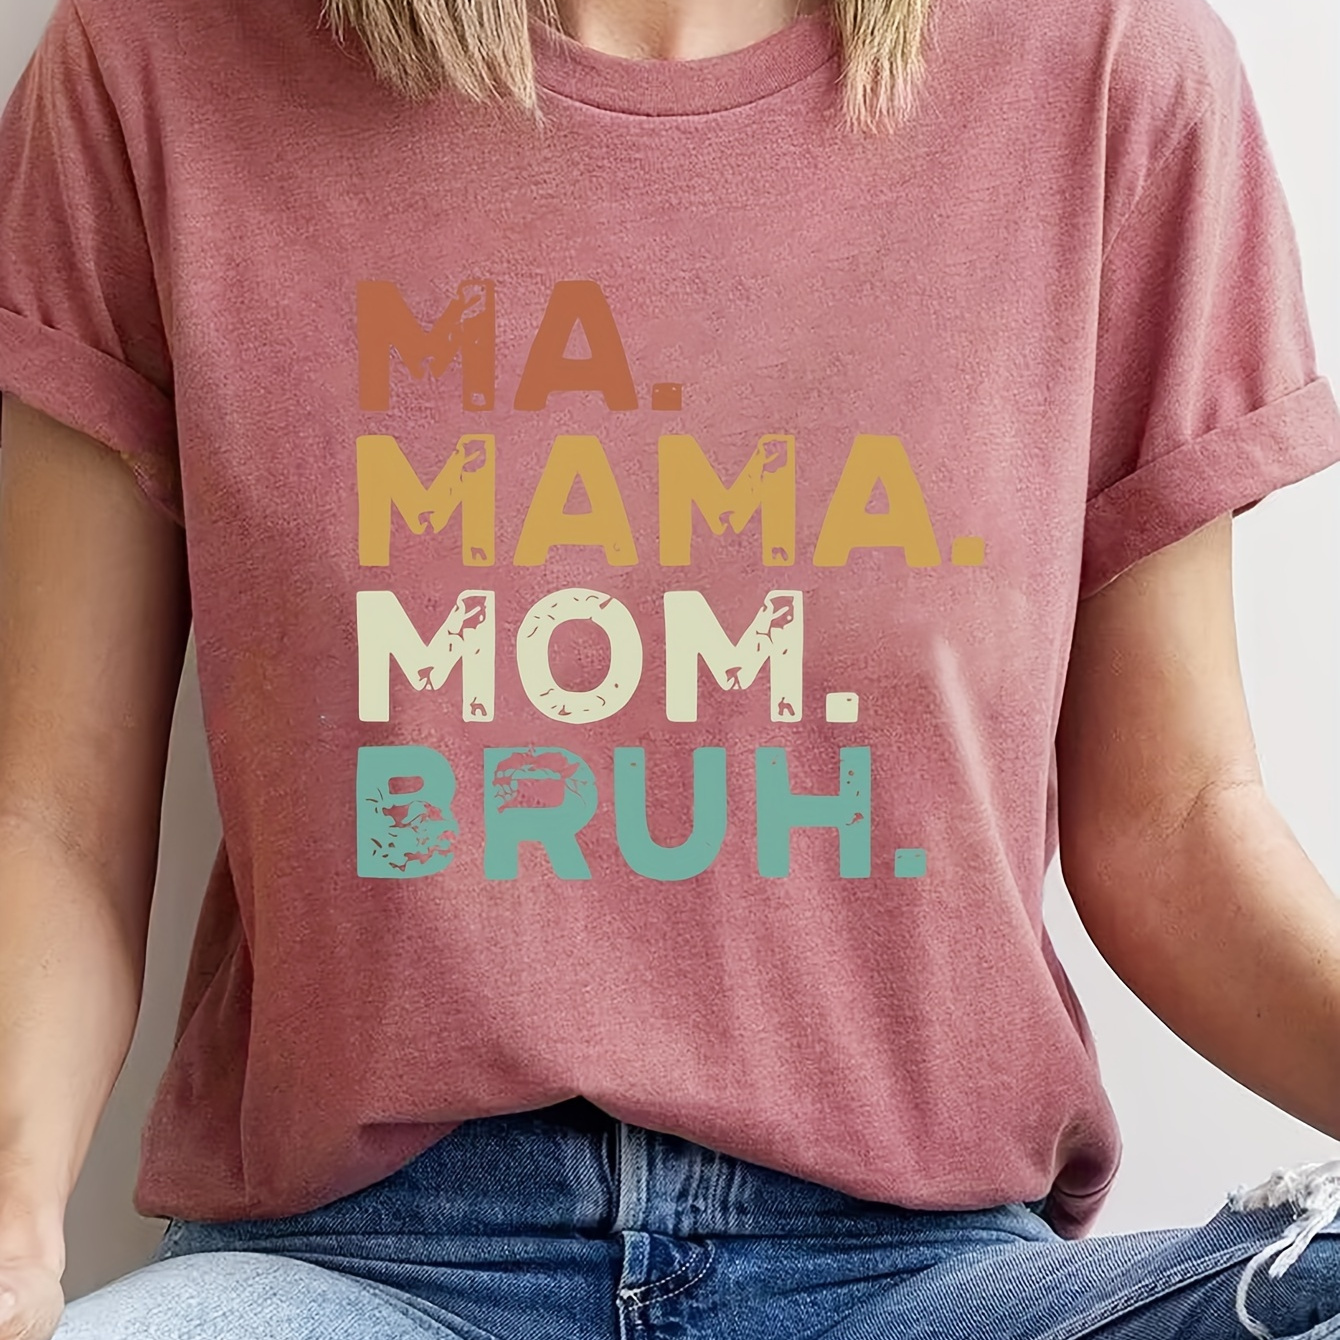 

Mama Mom Bruh Letter Print T-shirt, Short Sleeve Crew Neck Casual Top For Summer & Spring, Women's Clothing